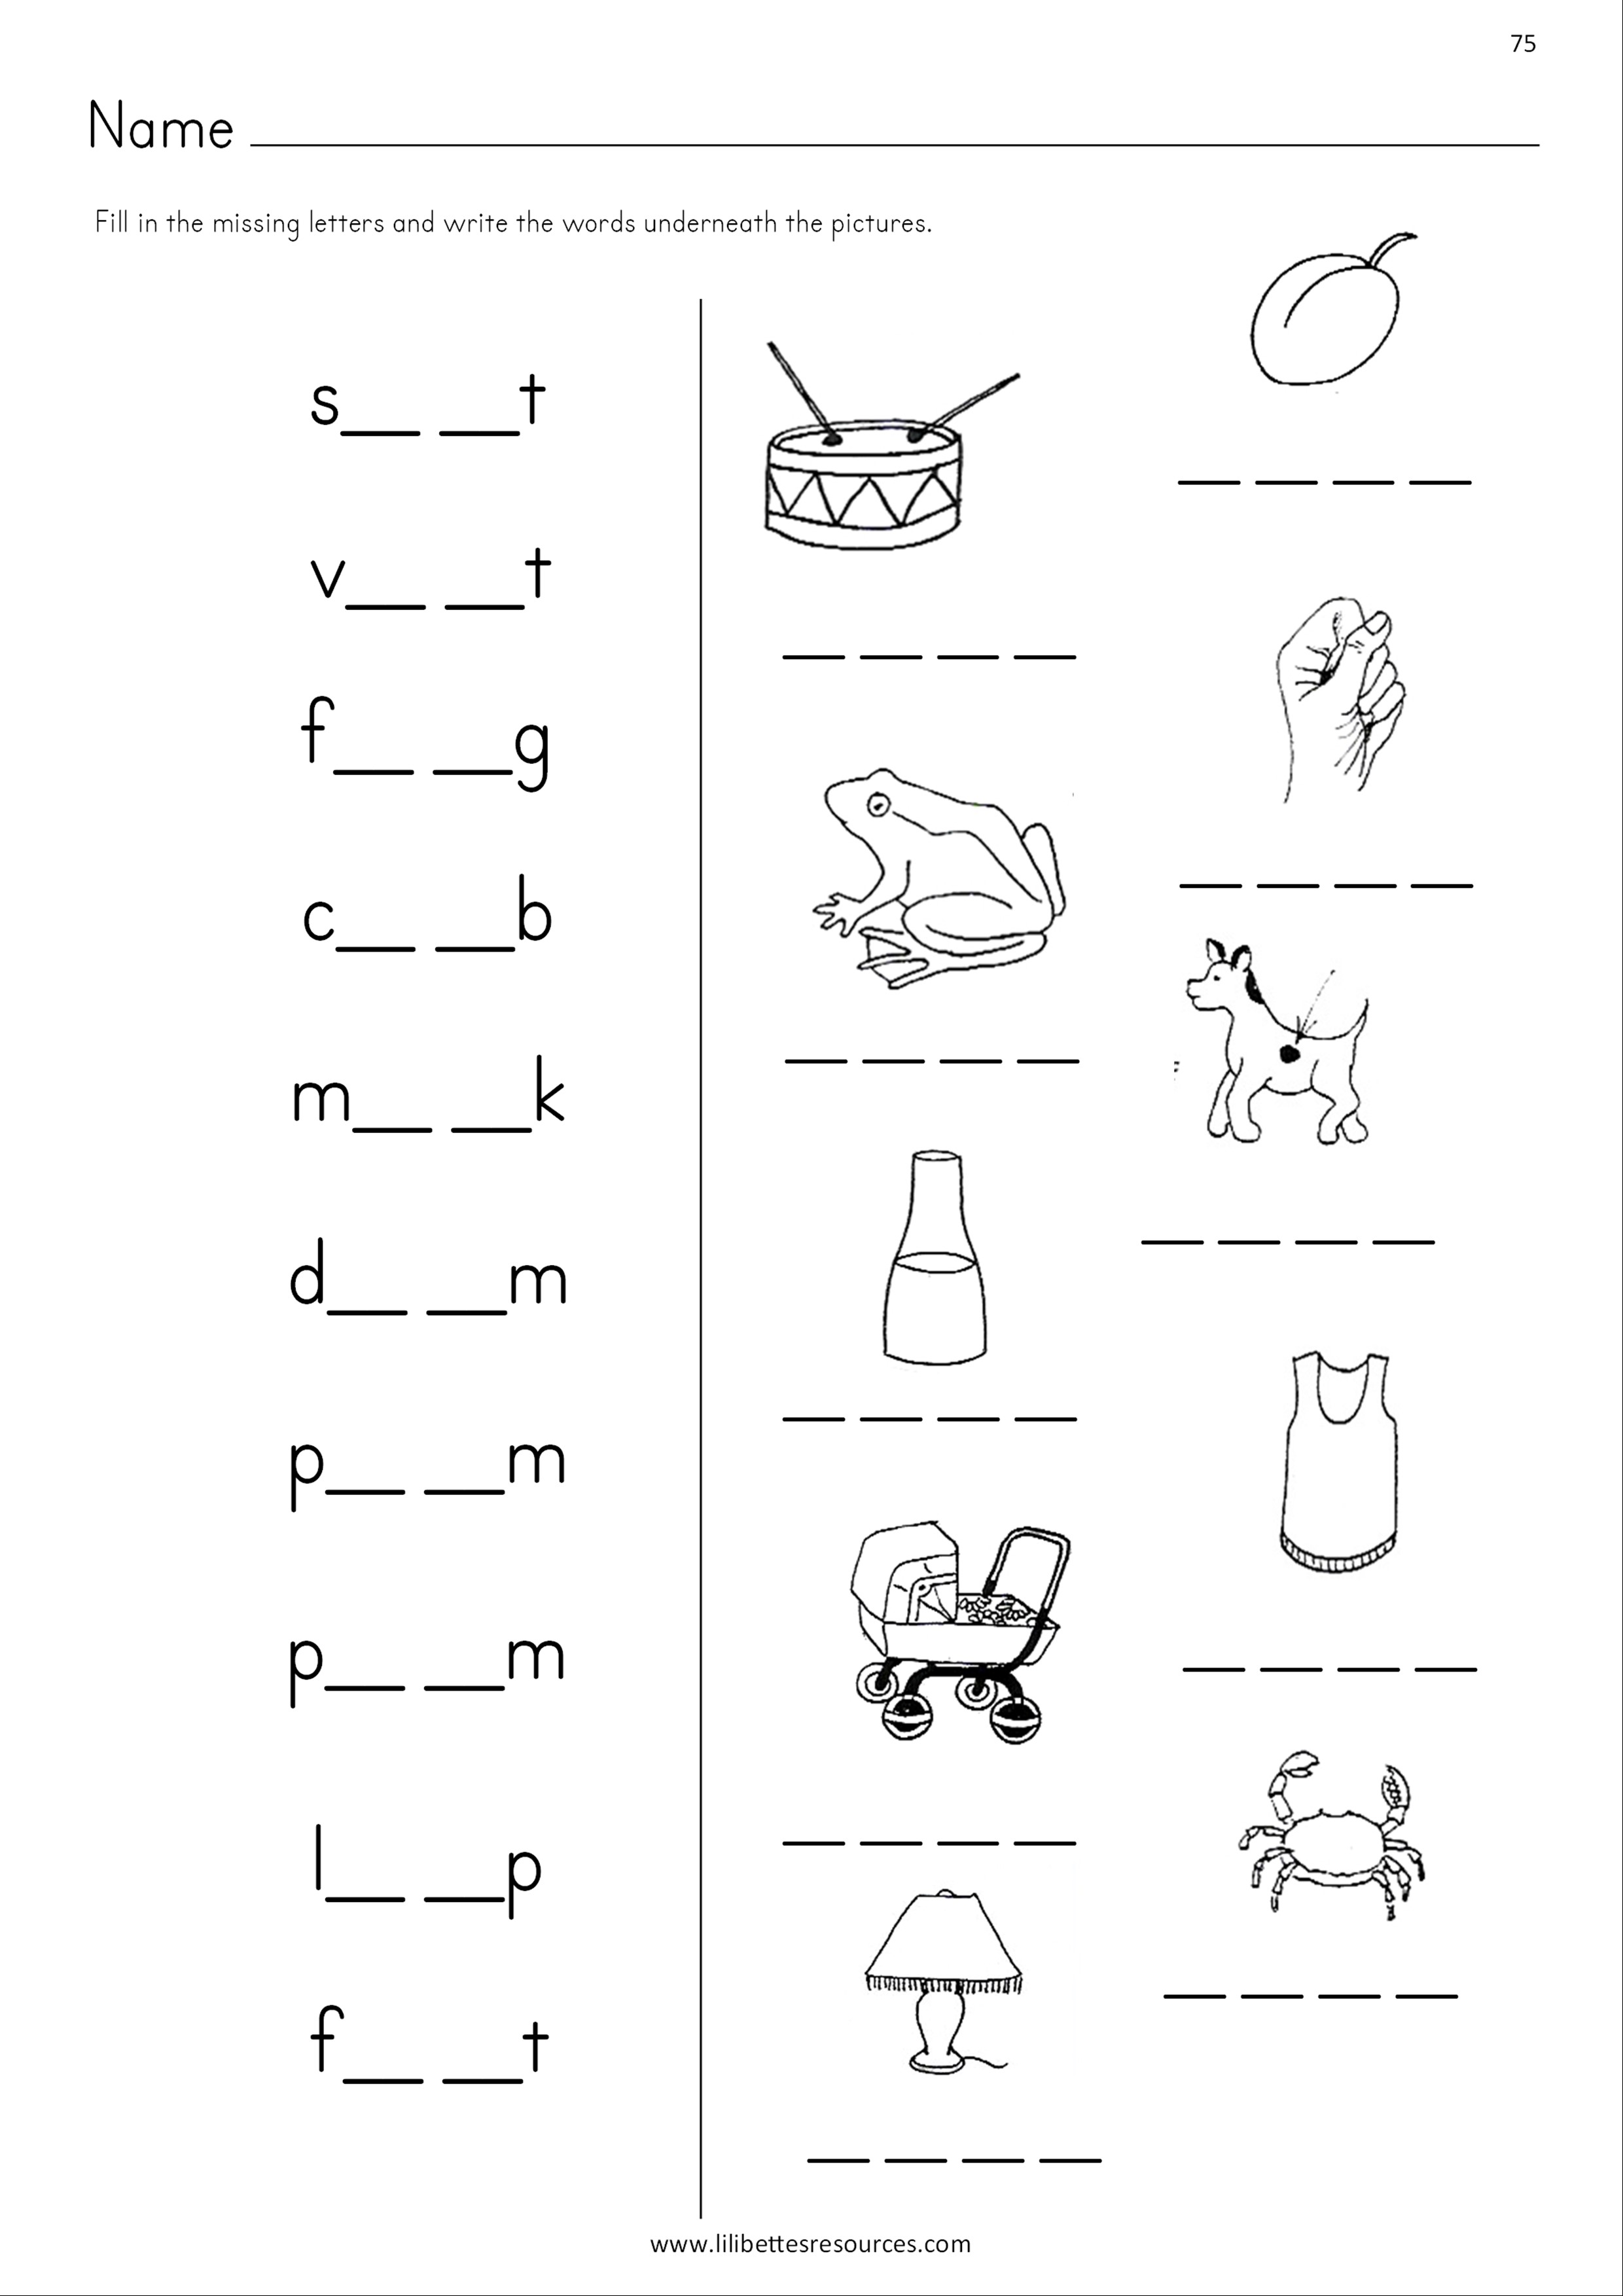 cvcc-words-worksheets-sound-it-out-phonics